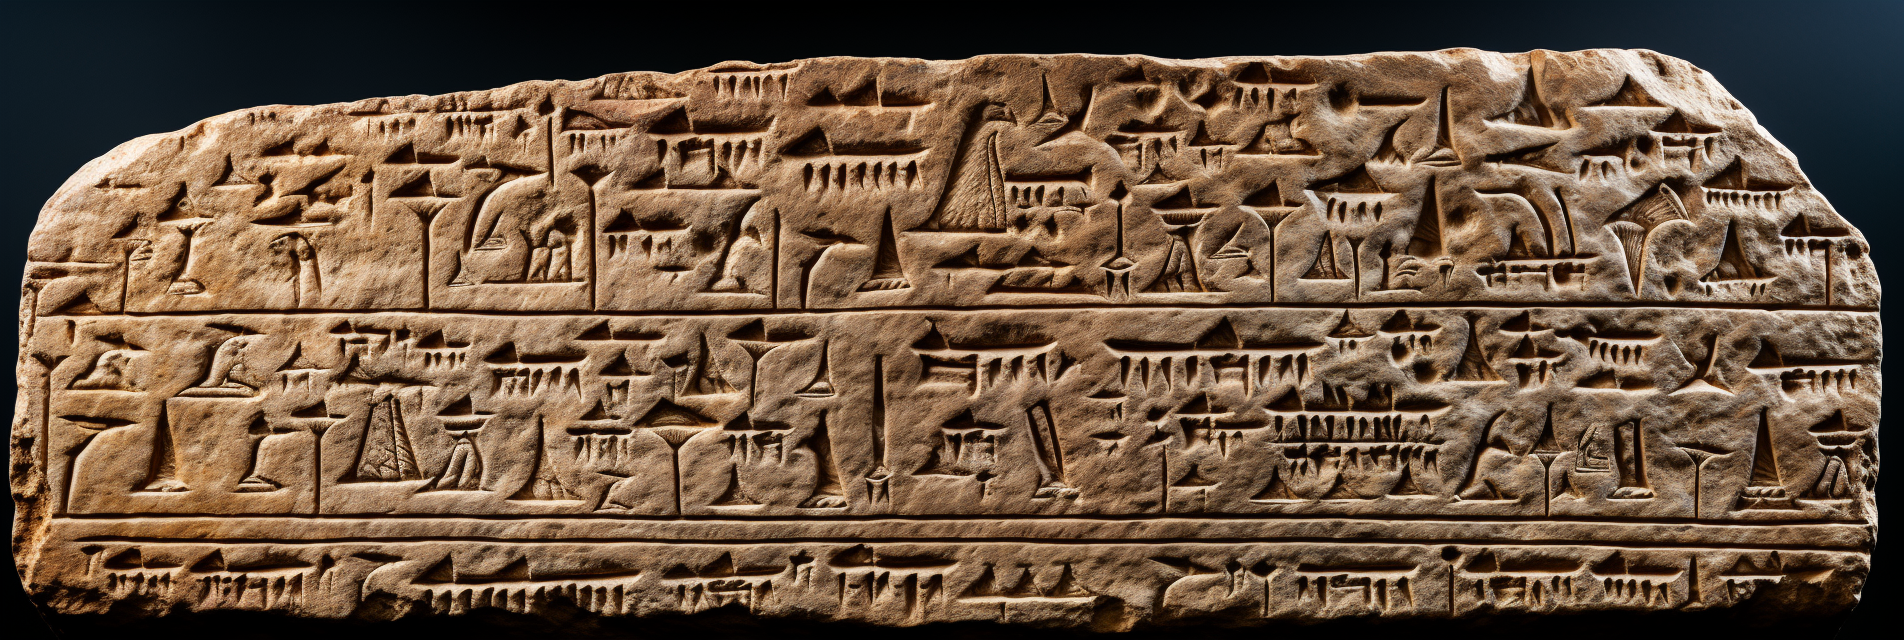 Sumerian tablet depicting aliens and space ships